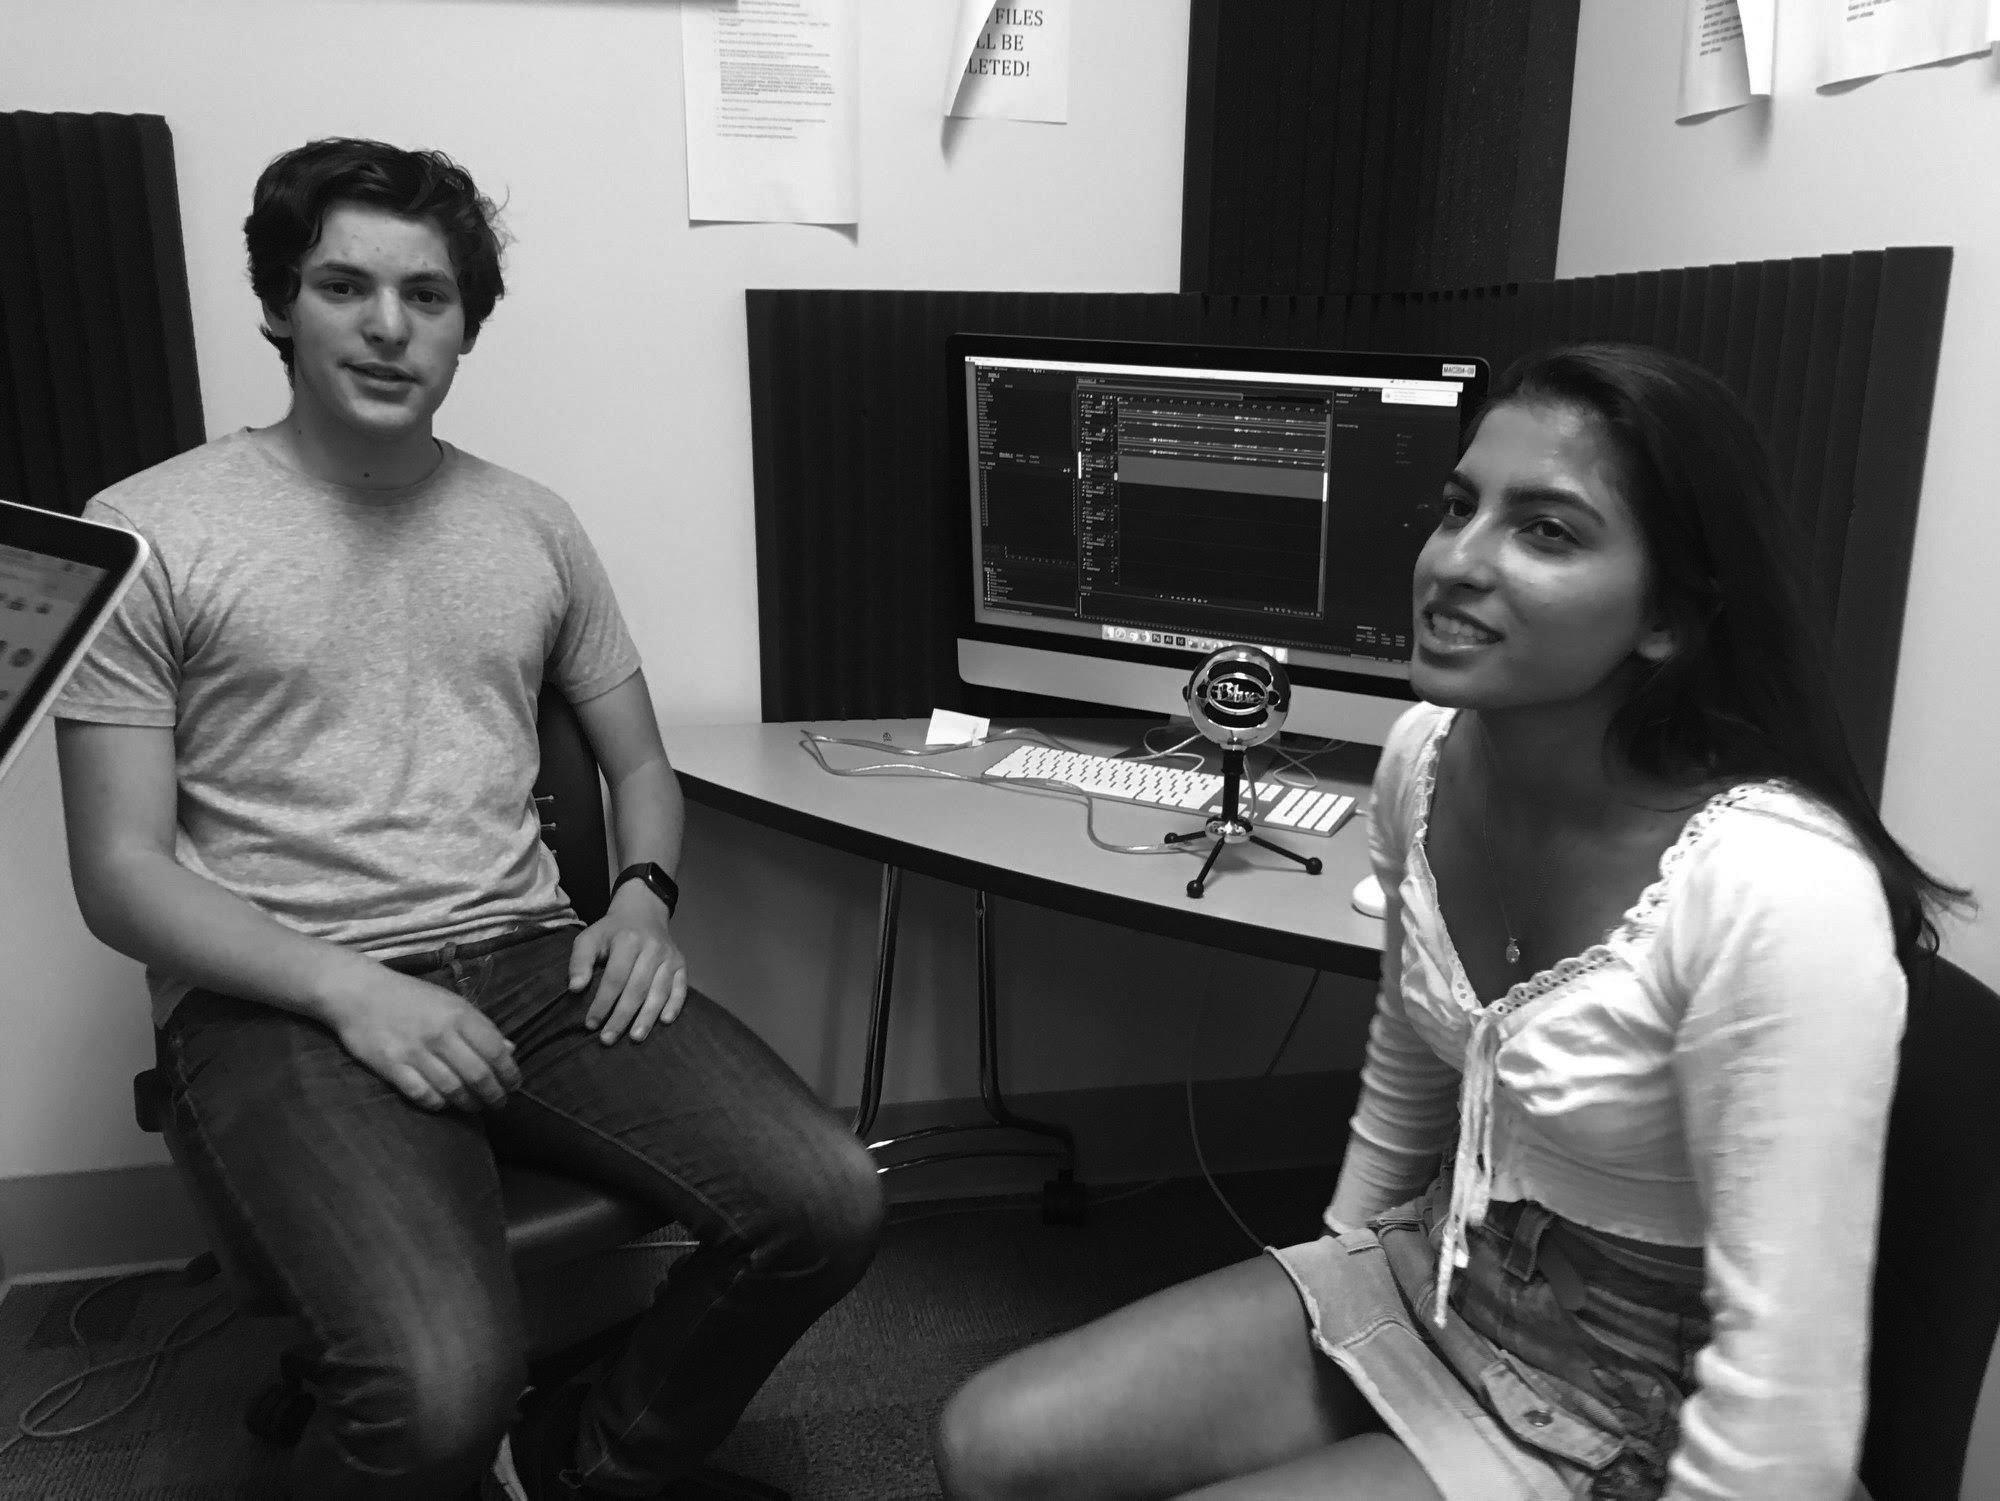 Podcasts rise in popularity among students